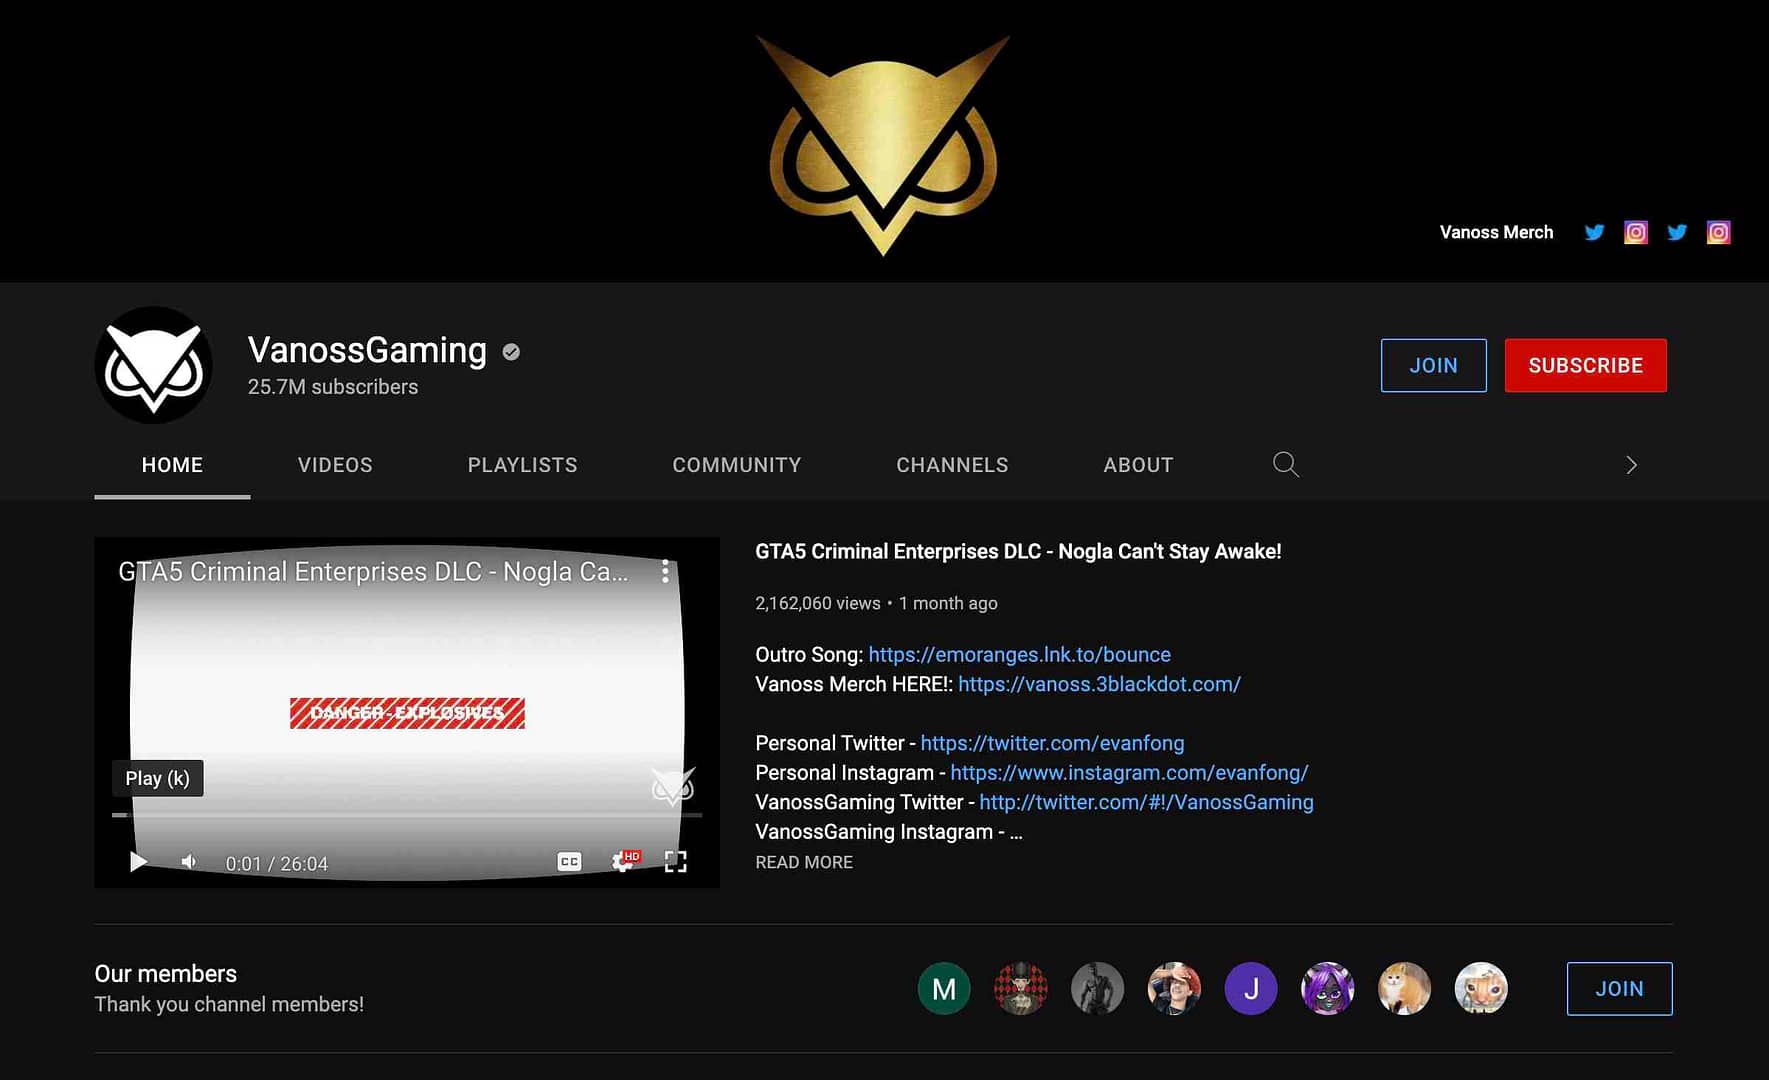 VanossGaming YouTube channel's homepage